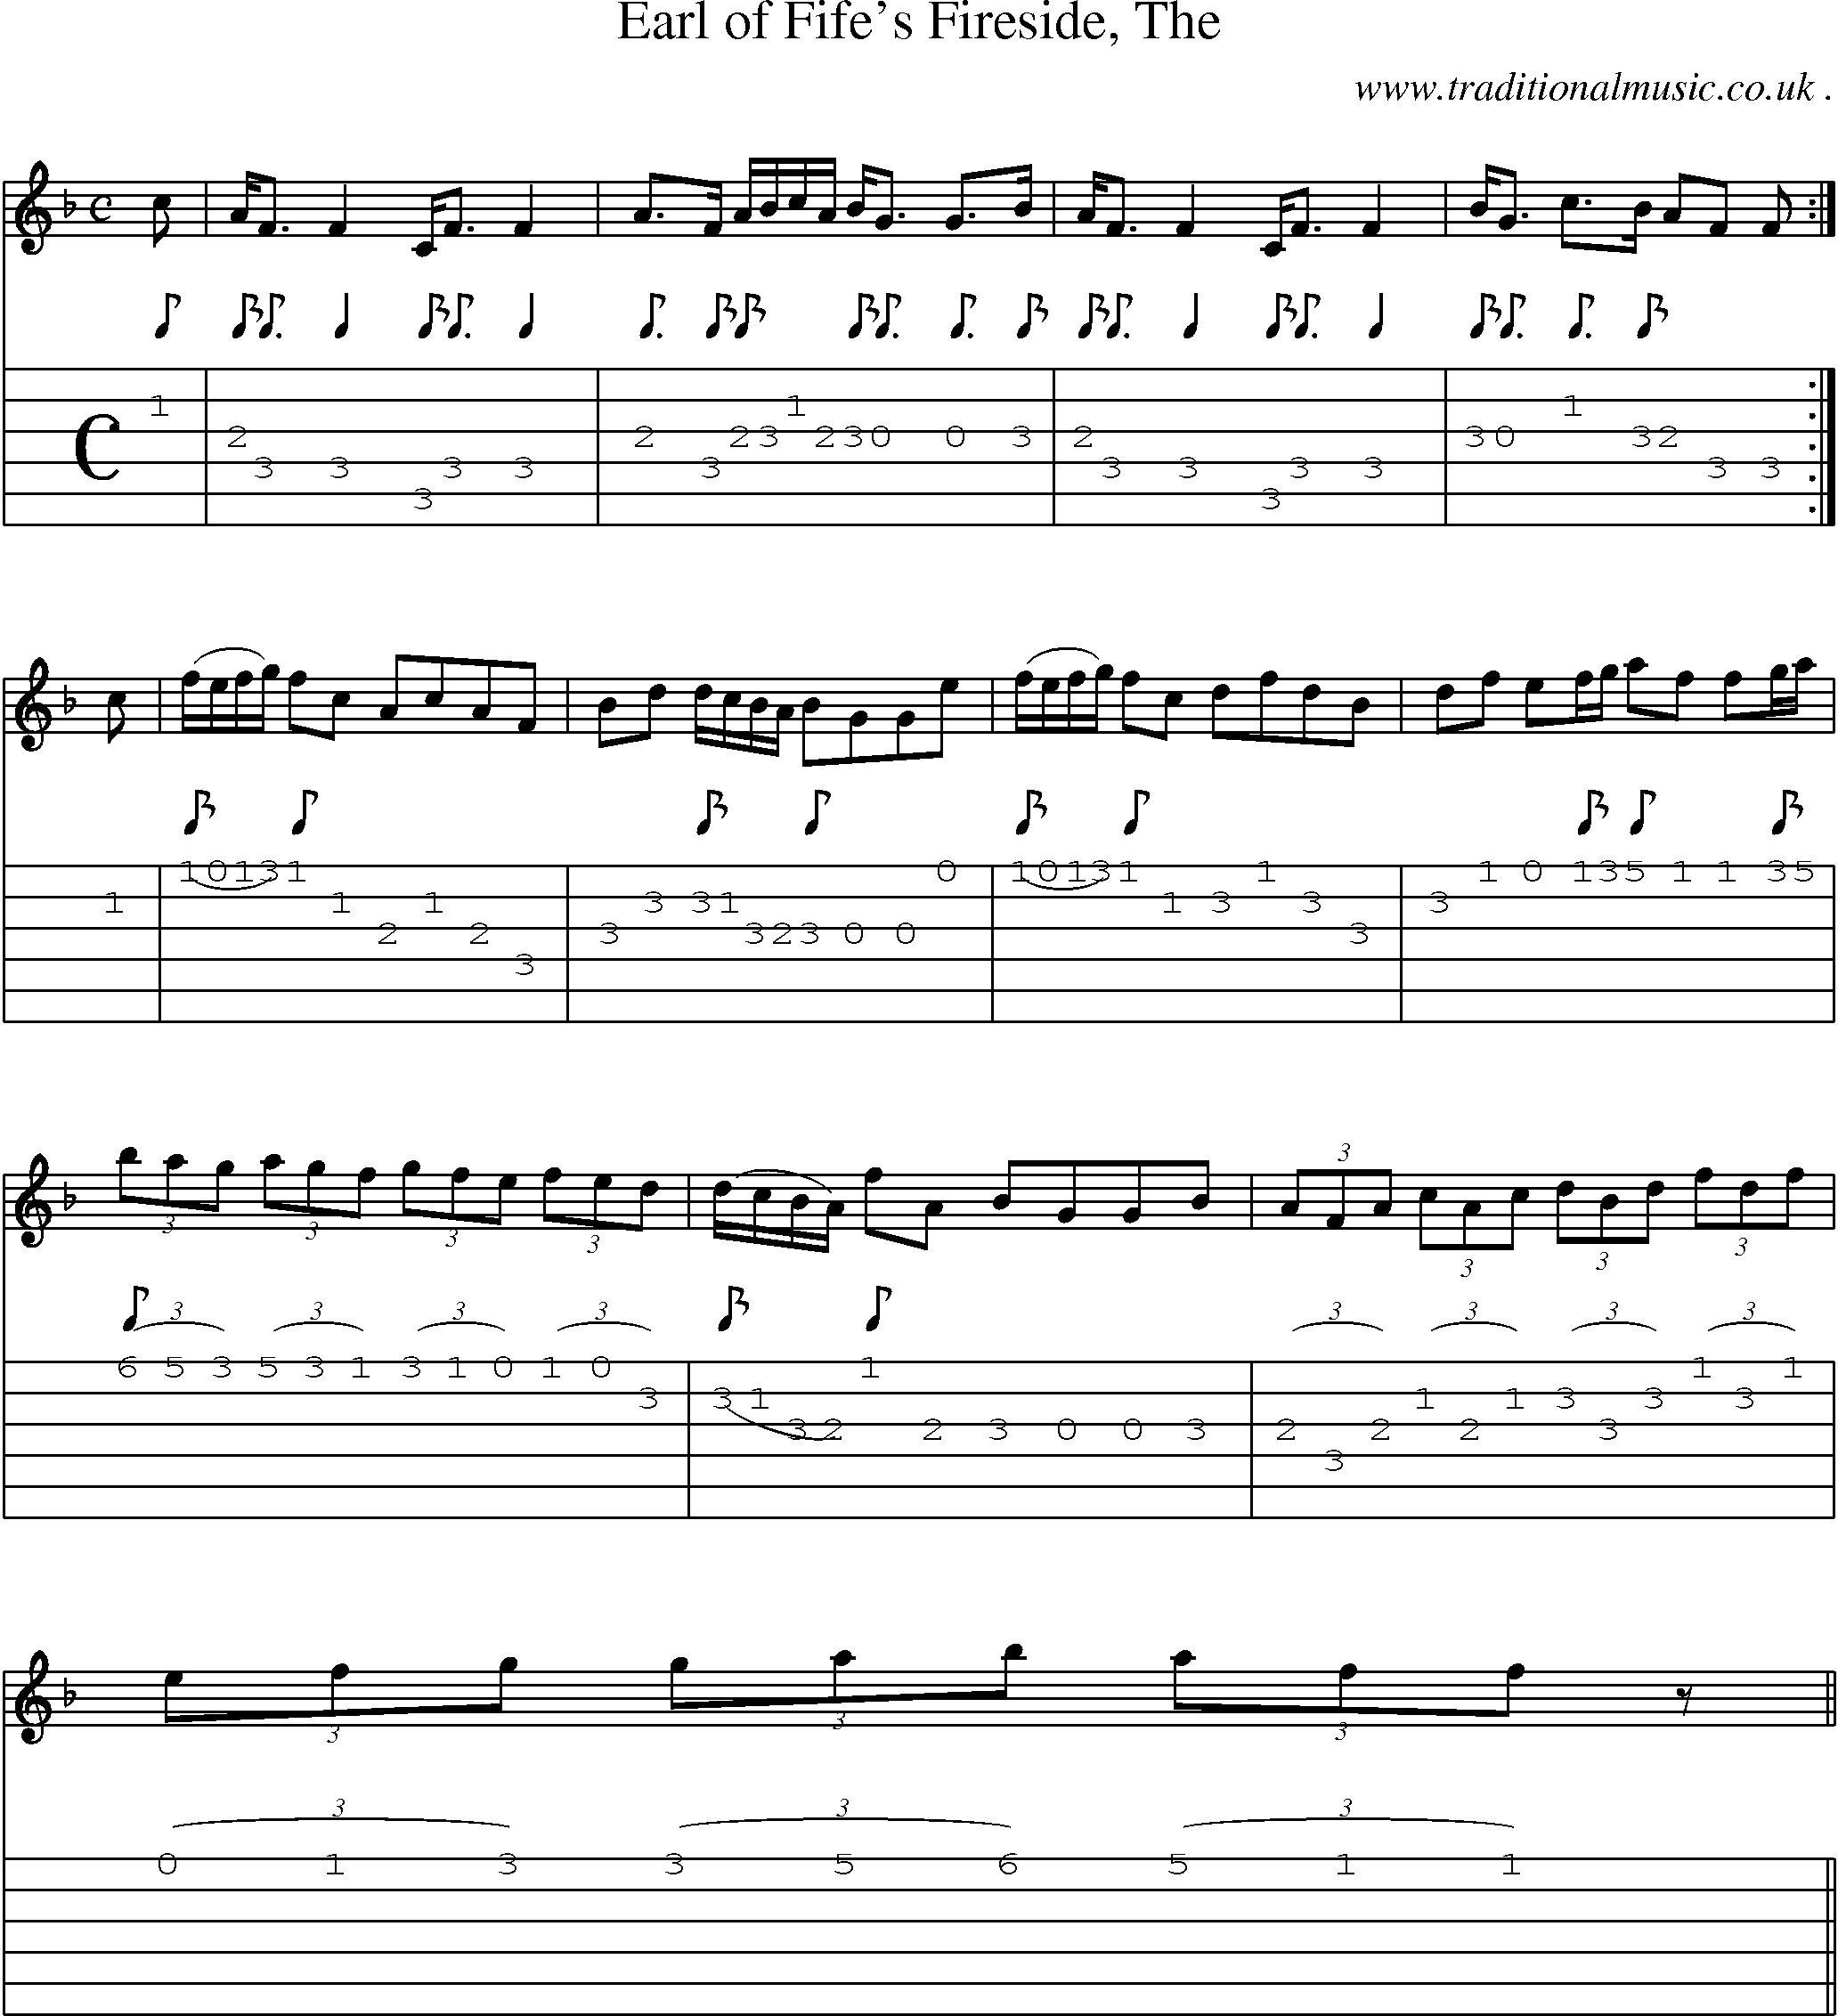 Sheet-music  score, Chords and Guitar Tabs for Earl Of Fifes Fireside The